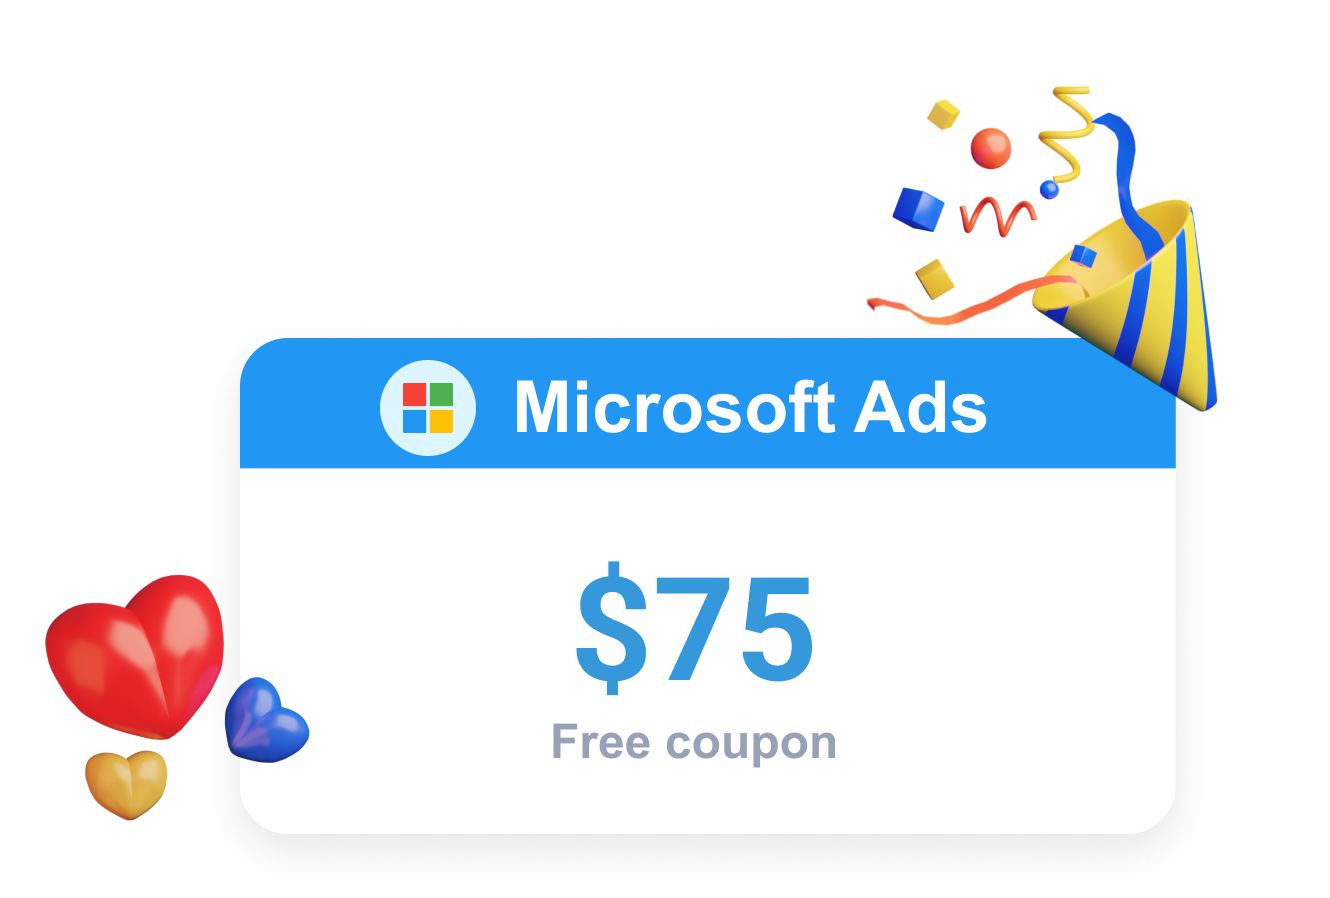 Clever Ads offers a Microsoft Ads Promo in the form of a Bing Ads free coupon